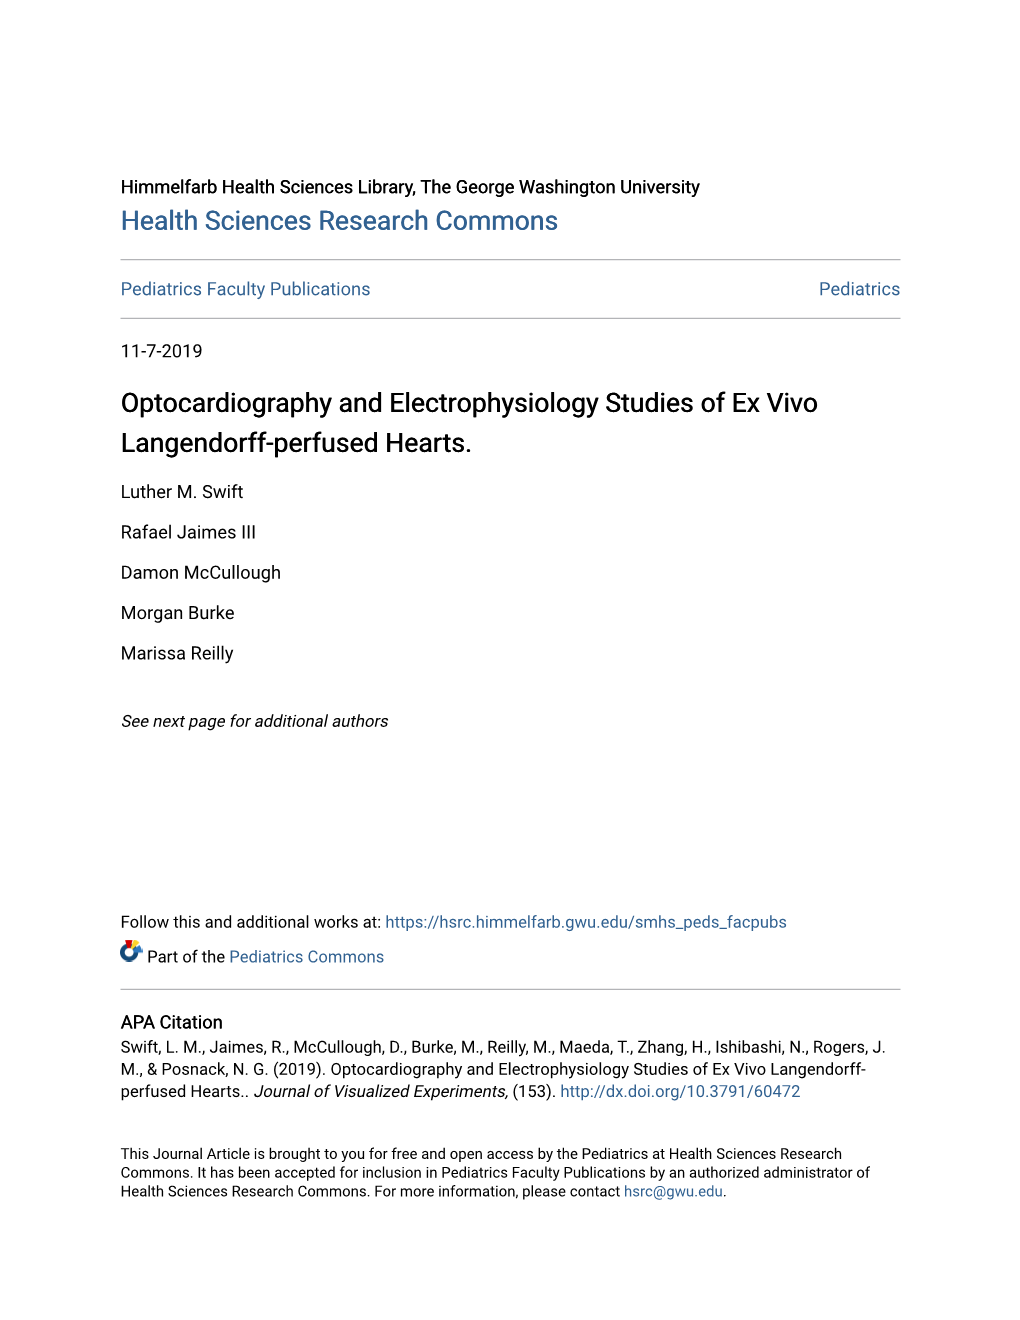 Optocardiography and Electrophysiology Studies of Ex Vivo Langendorff-Perfused Hearts